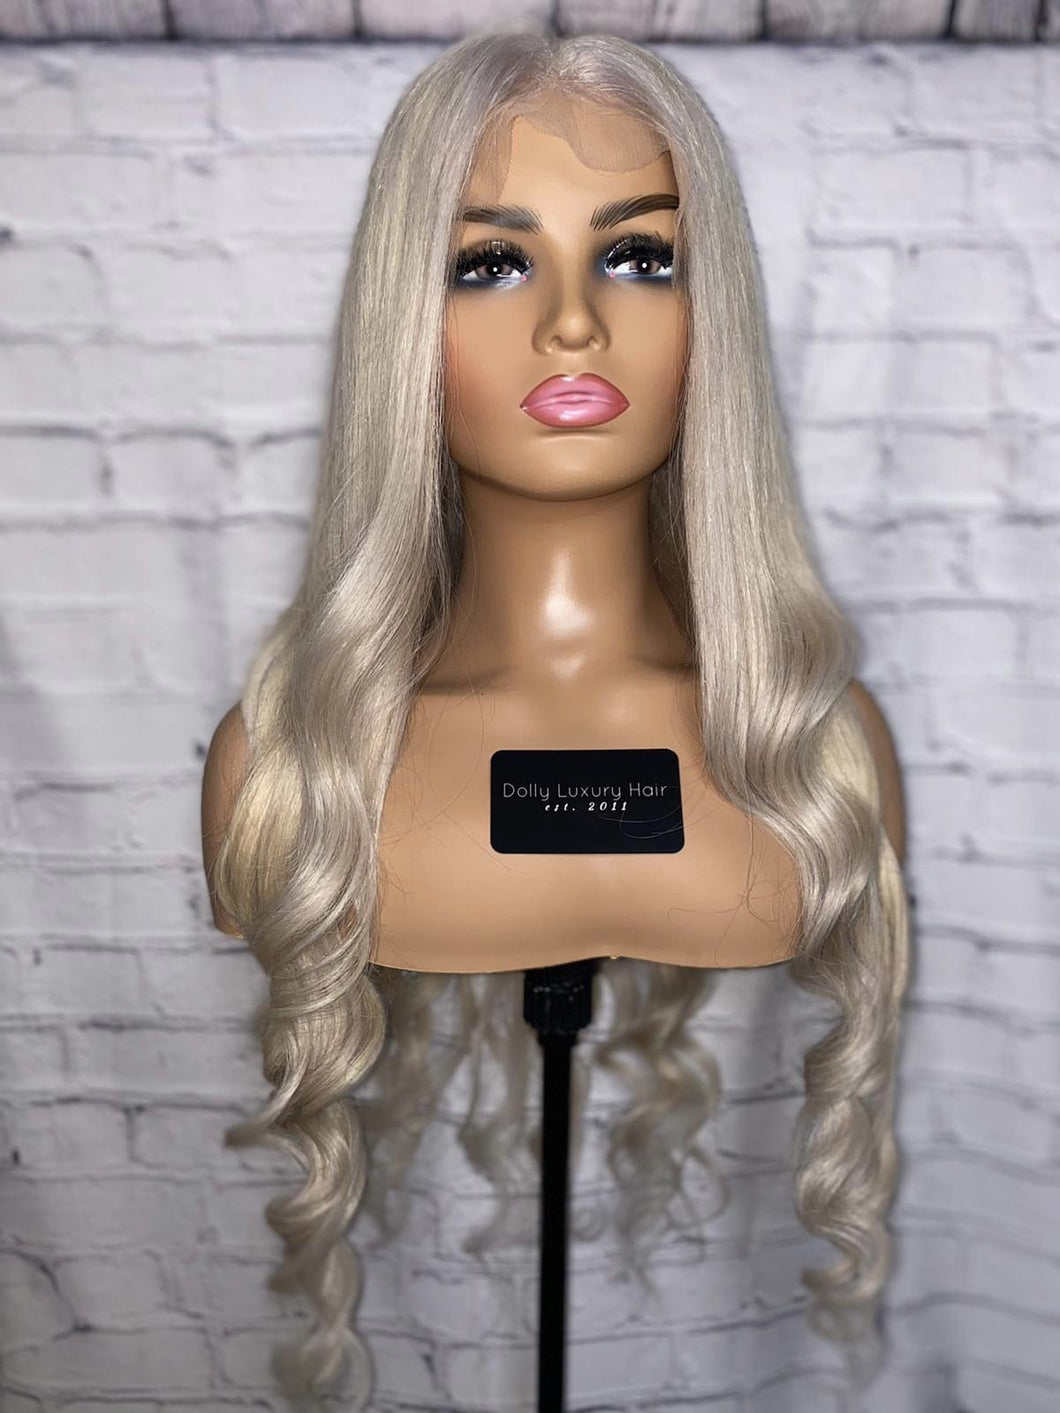 Luxury Icy Platinum Bleach Blonde 100% Human Hair Swiss 13x4 Lace Front Glueless Wig Wavy U-Part, 360 or Full Lace Upgrade Available 2021